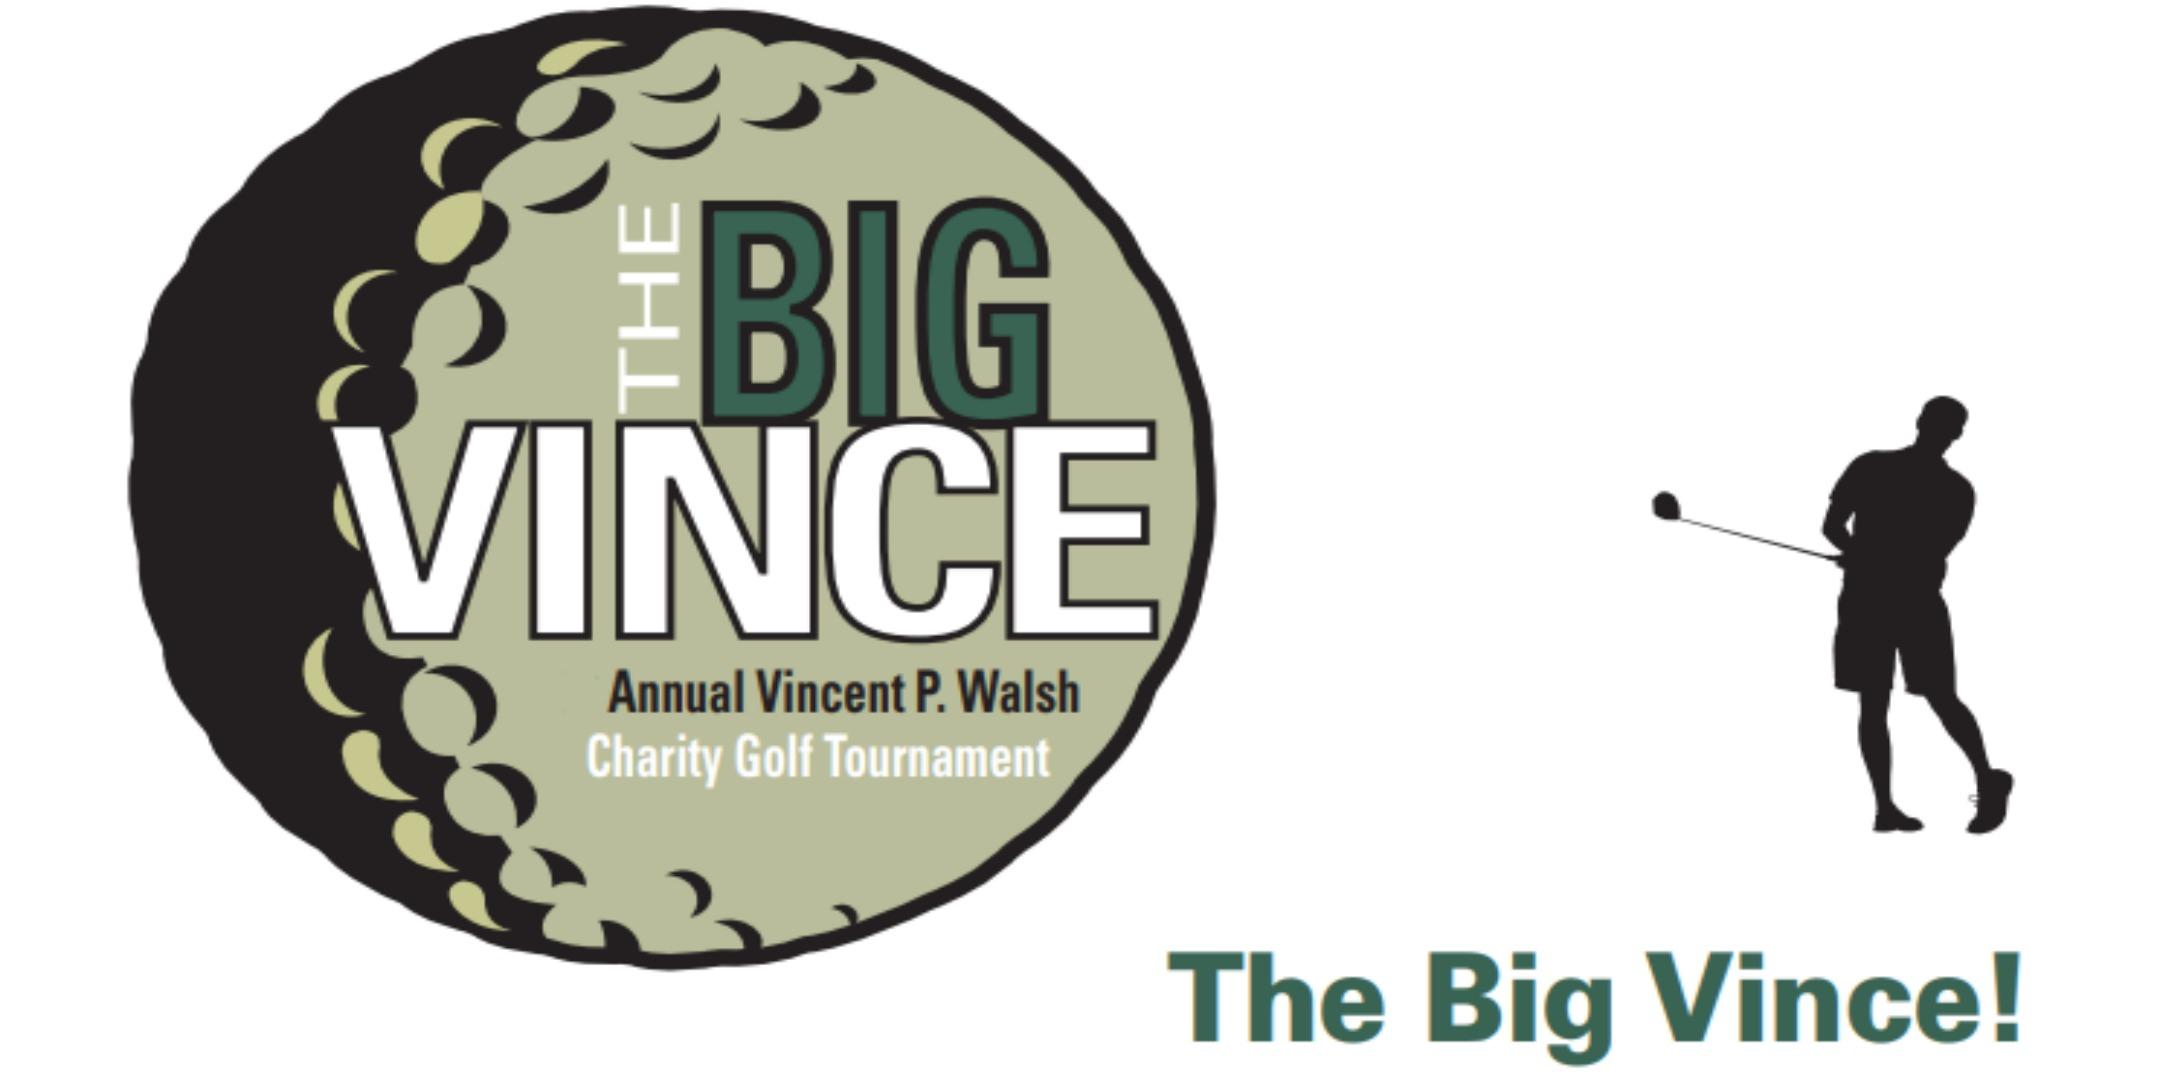 7th Annual Vincent P. Walsh Charity Golf Tournament - The Big Vince!